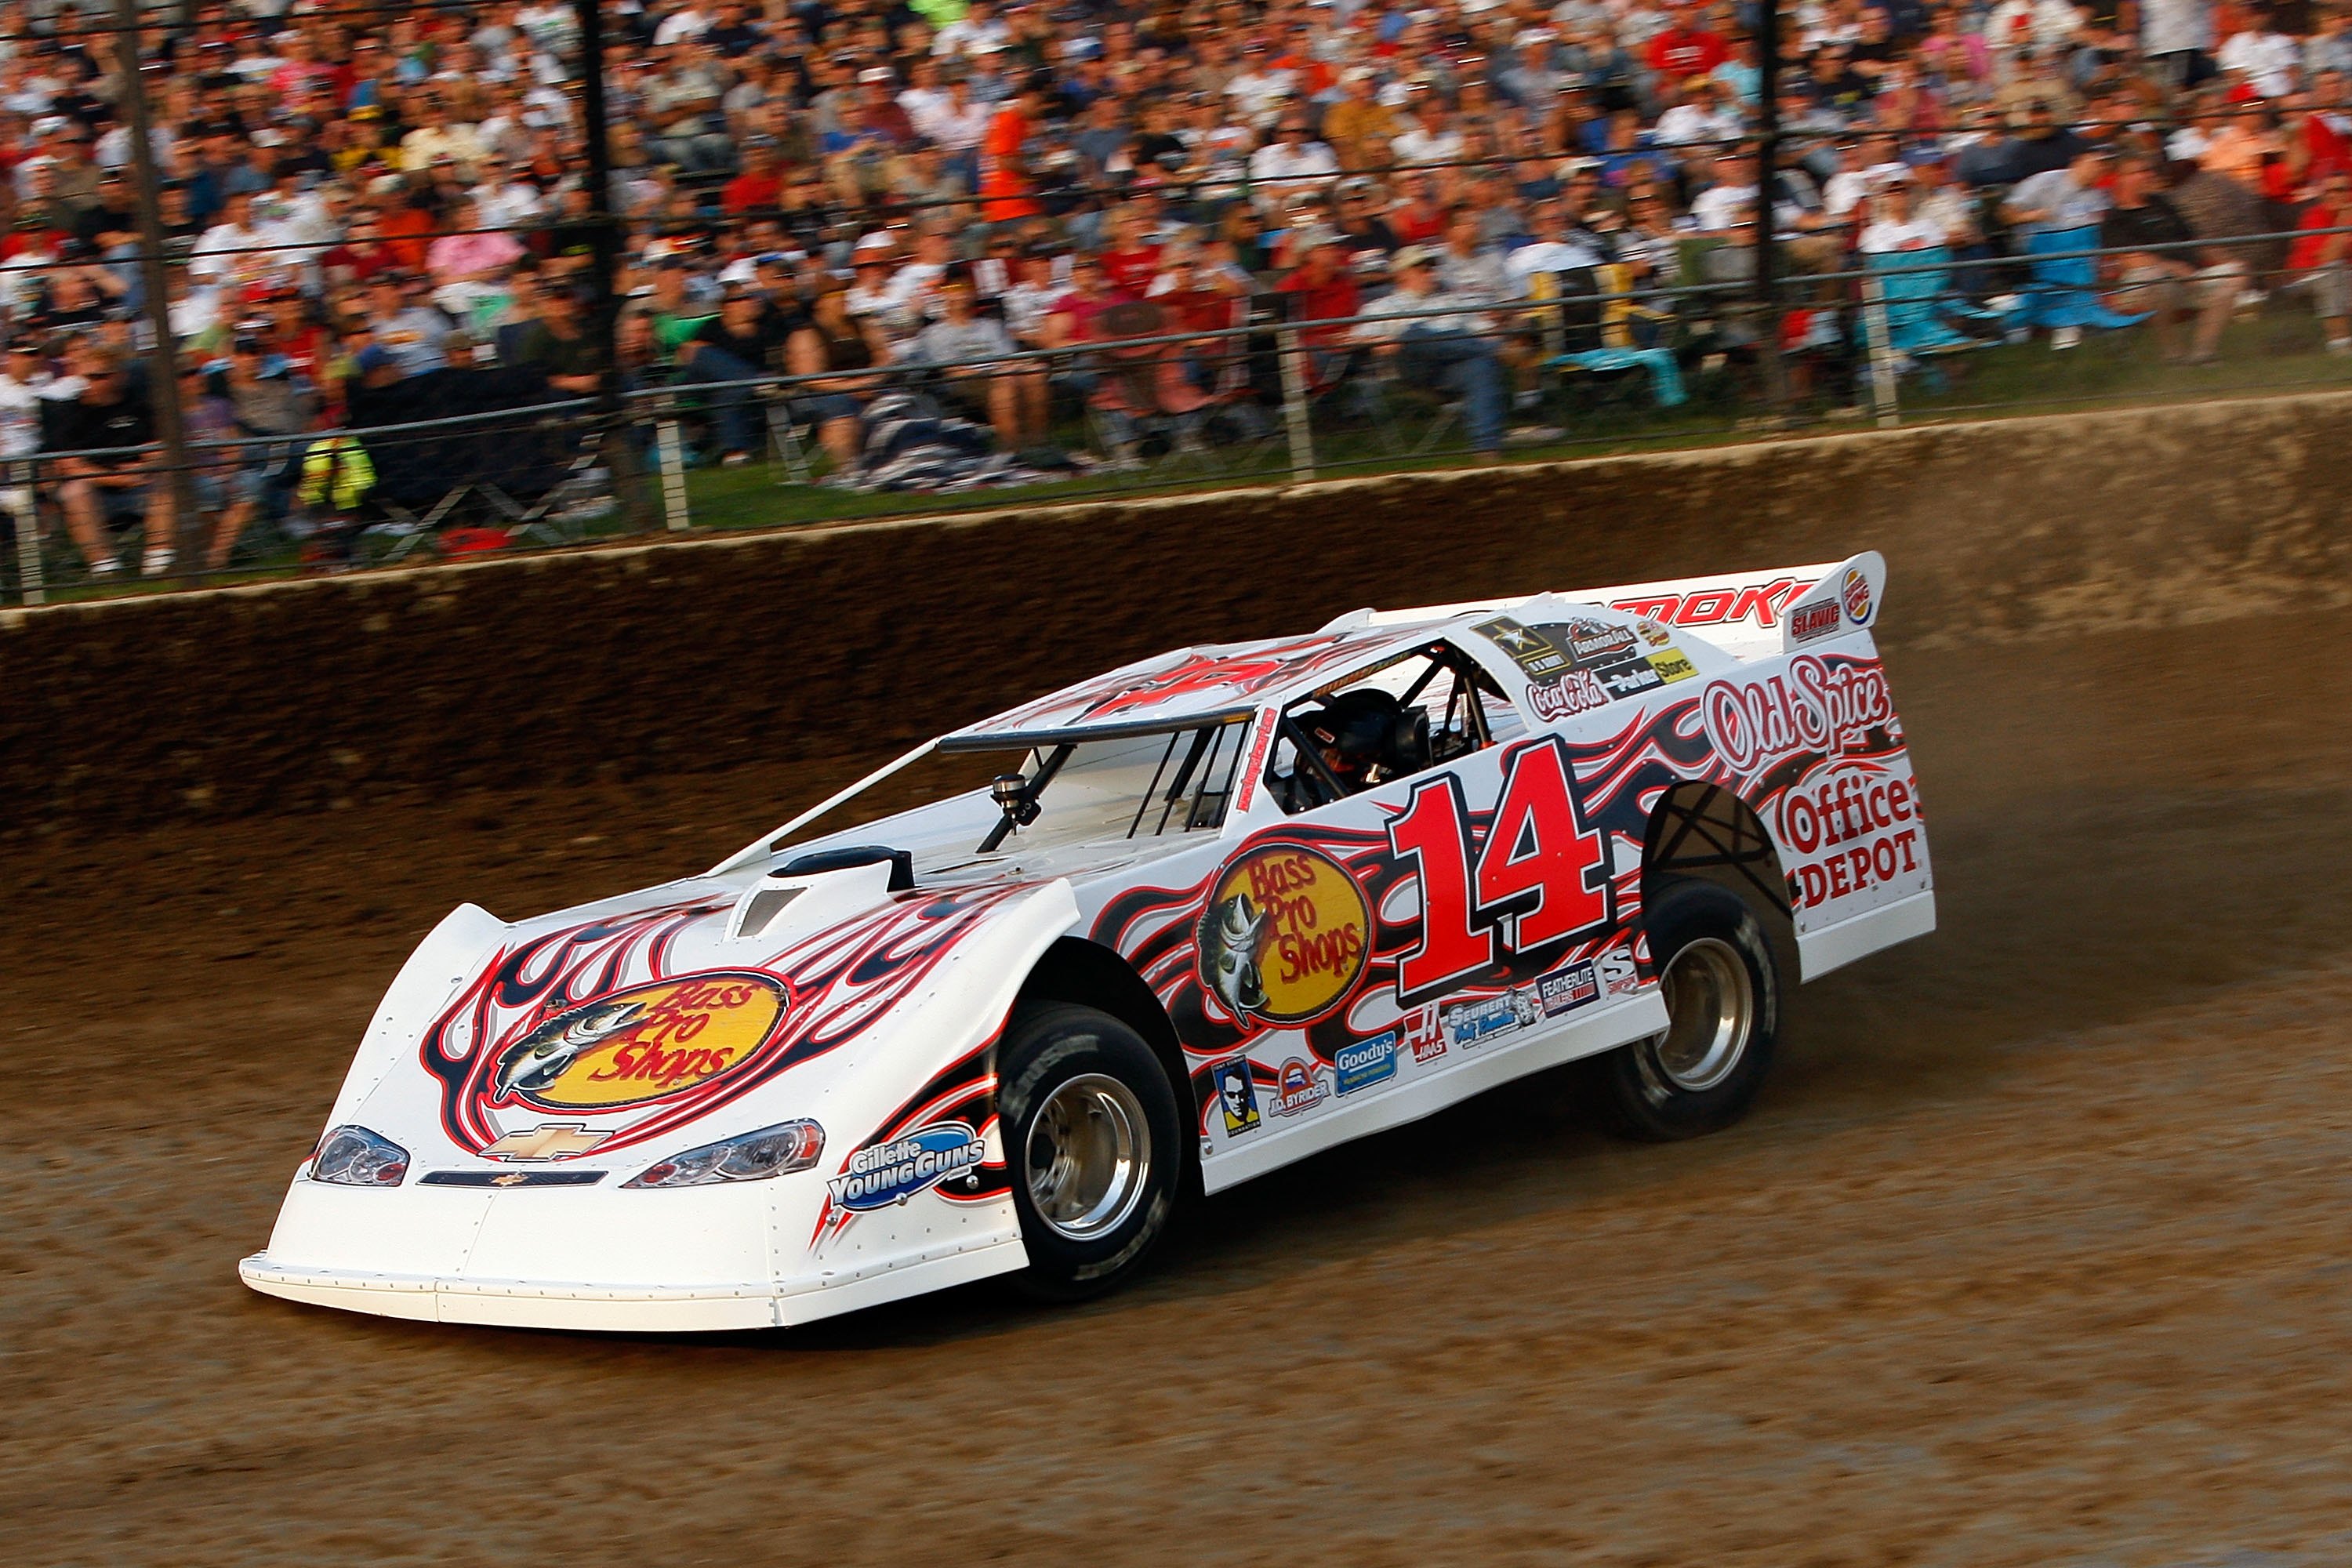 Tony Steweart loves racing on his own Eldora Speedway any chance he can get.